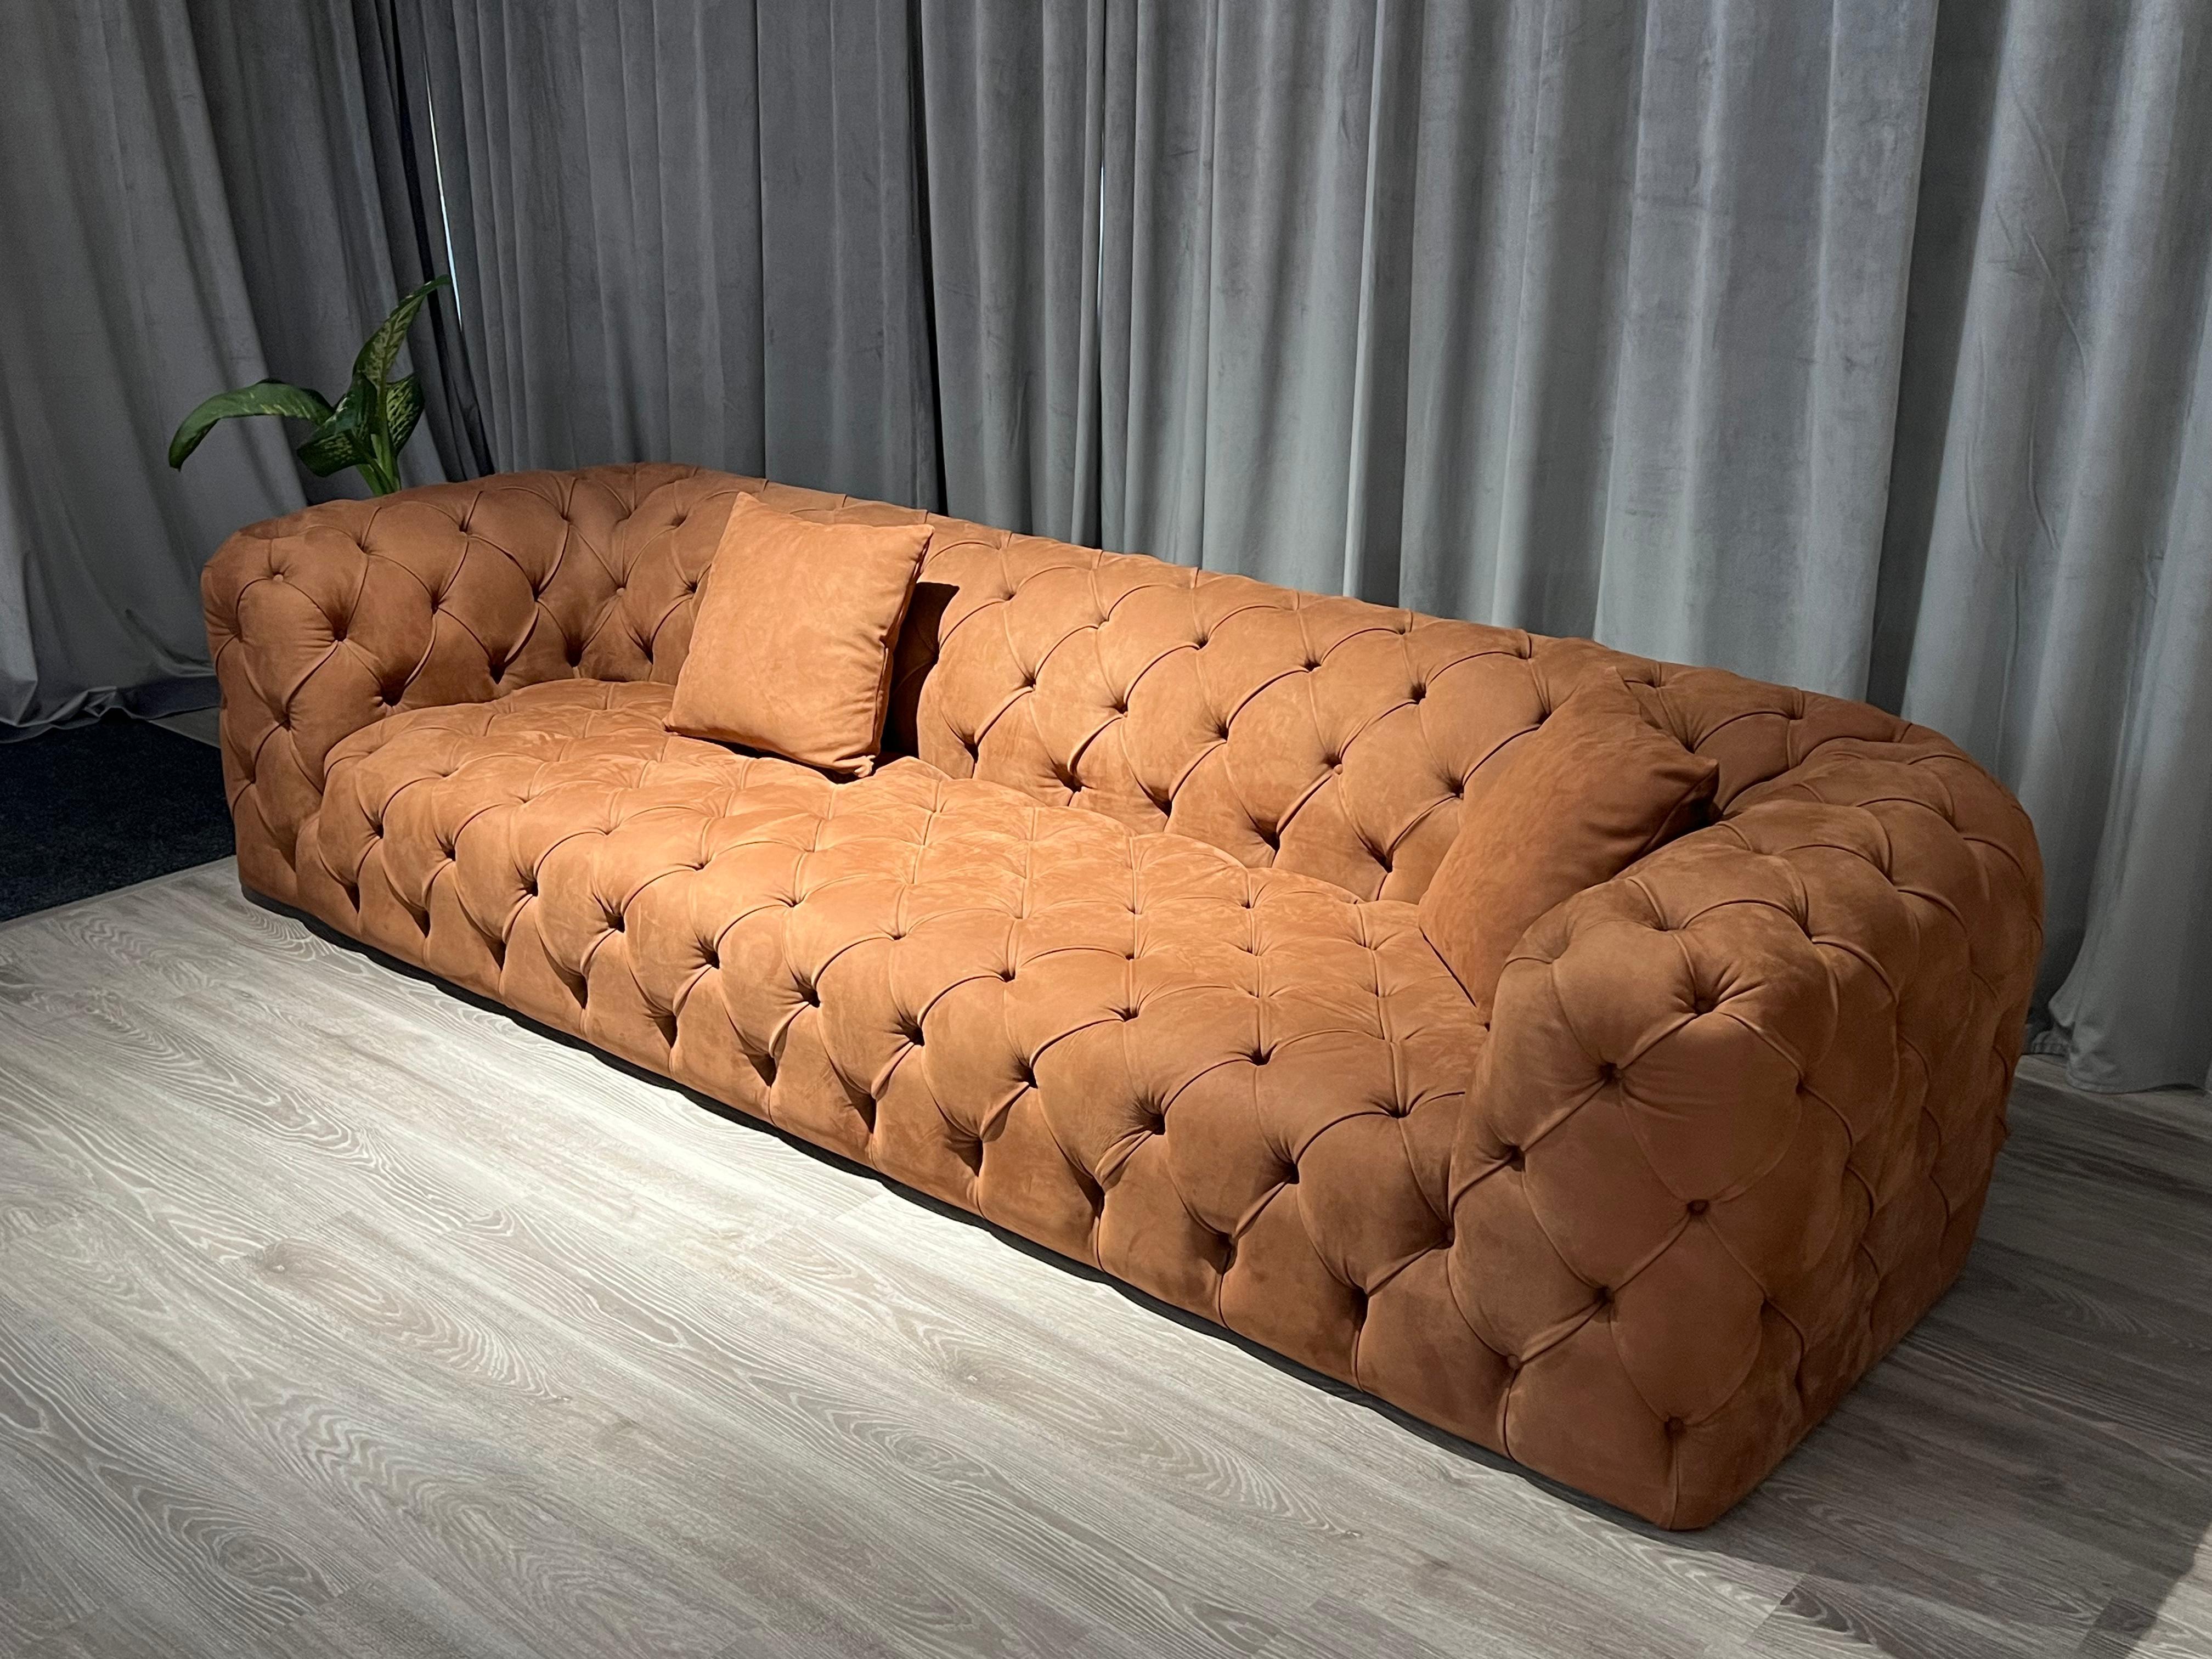 Oxford is a sofa that talks: it talks about History, it talks about memories, it talks about emotions. And it is exciting to sit on such an elegant sofa, evoking smoky and exciting atmospheres, and immediately hinting at unparalleled comfort, thanks